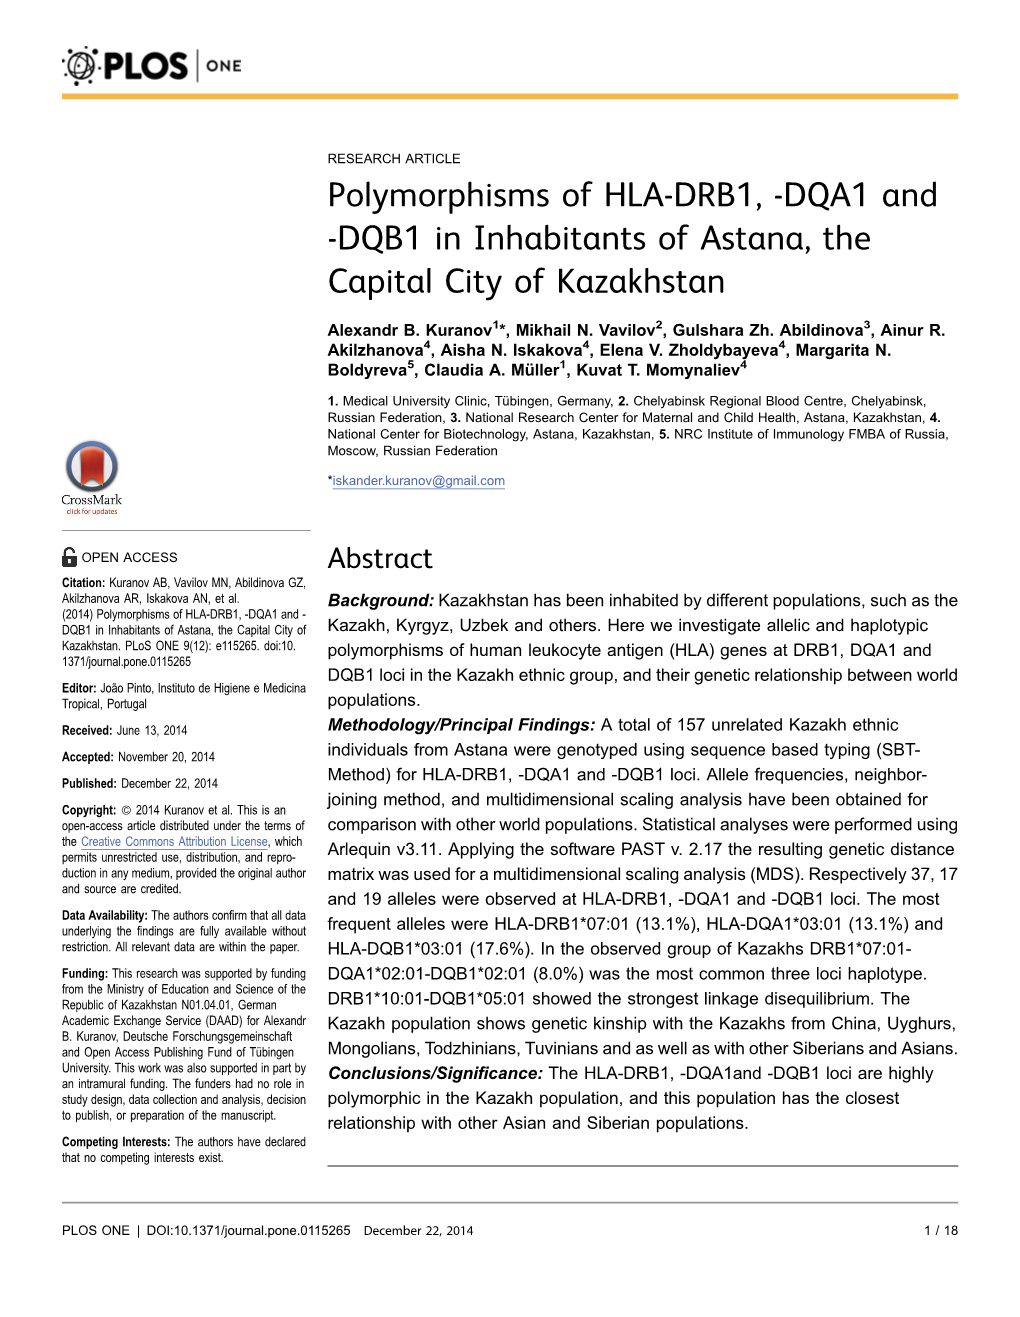 Polymorphisms of HLA-DRB1, -DQA1 and -DQB1 in Inhabitants of Astana, the Capital City of Kazakhstan